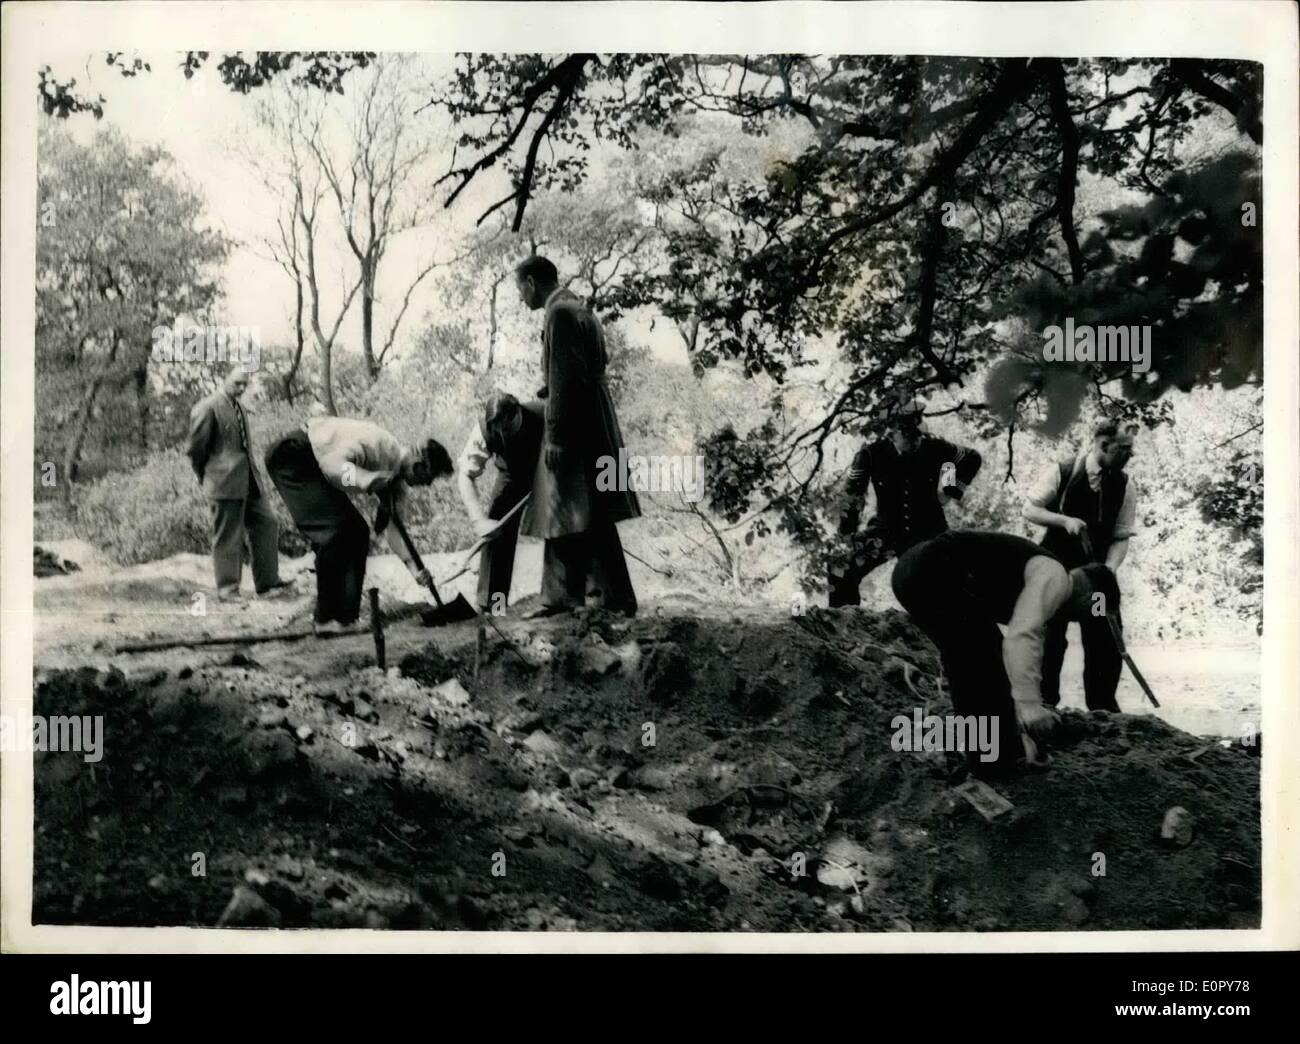 May 05, 1957 - WIDOW FOUND STRANGLED IN WOOD.. DIGGING BENEATH THE TREES.. The strangled body of 34 year old widow, Mrs. Muriel Maitland was found in a shallow grave beneath an elm tree in Cranford Park, Middlesex, last night after an all day search. The woman had disappeared on Tuesday. Keystone Photo Shows:- Digging before discovery of the body in Cranford Park last night. Stock Photo